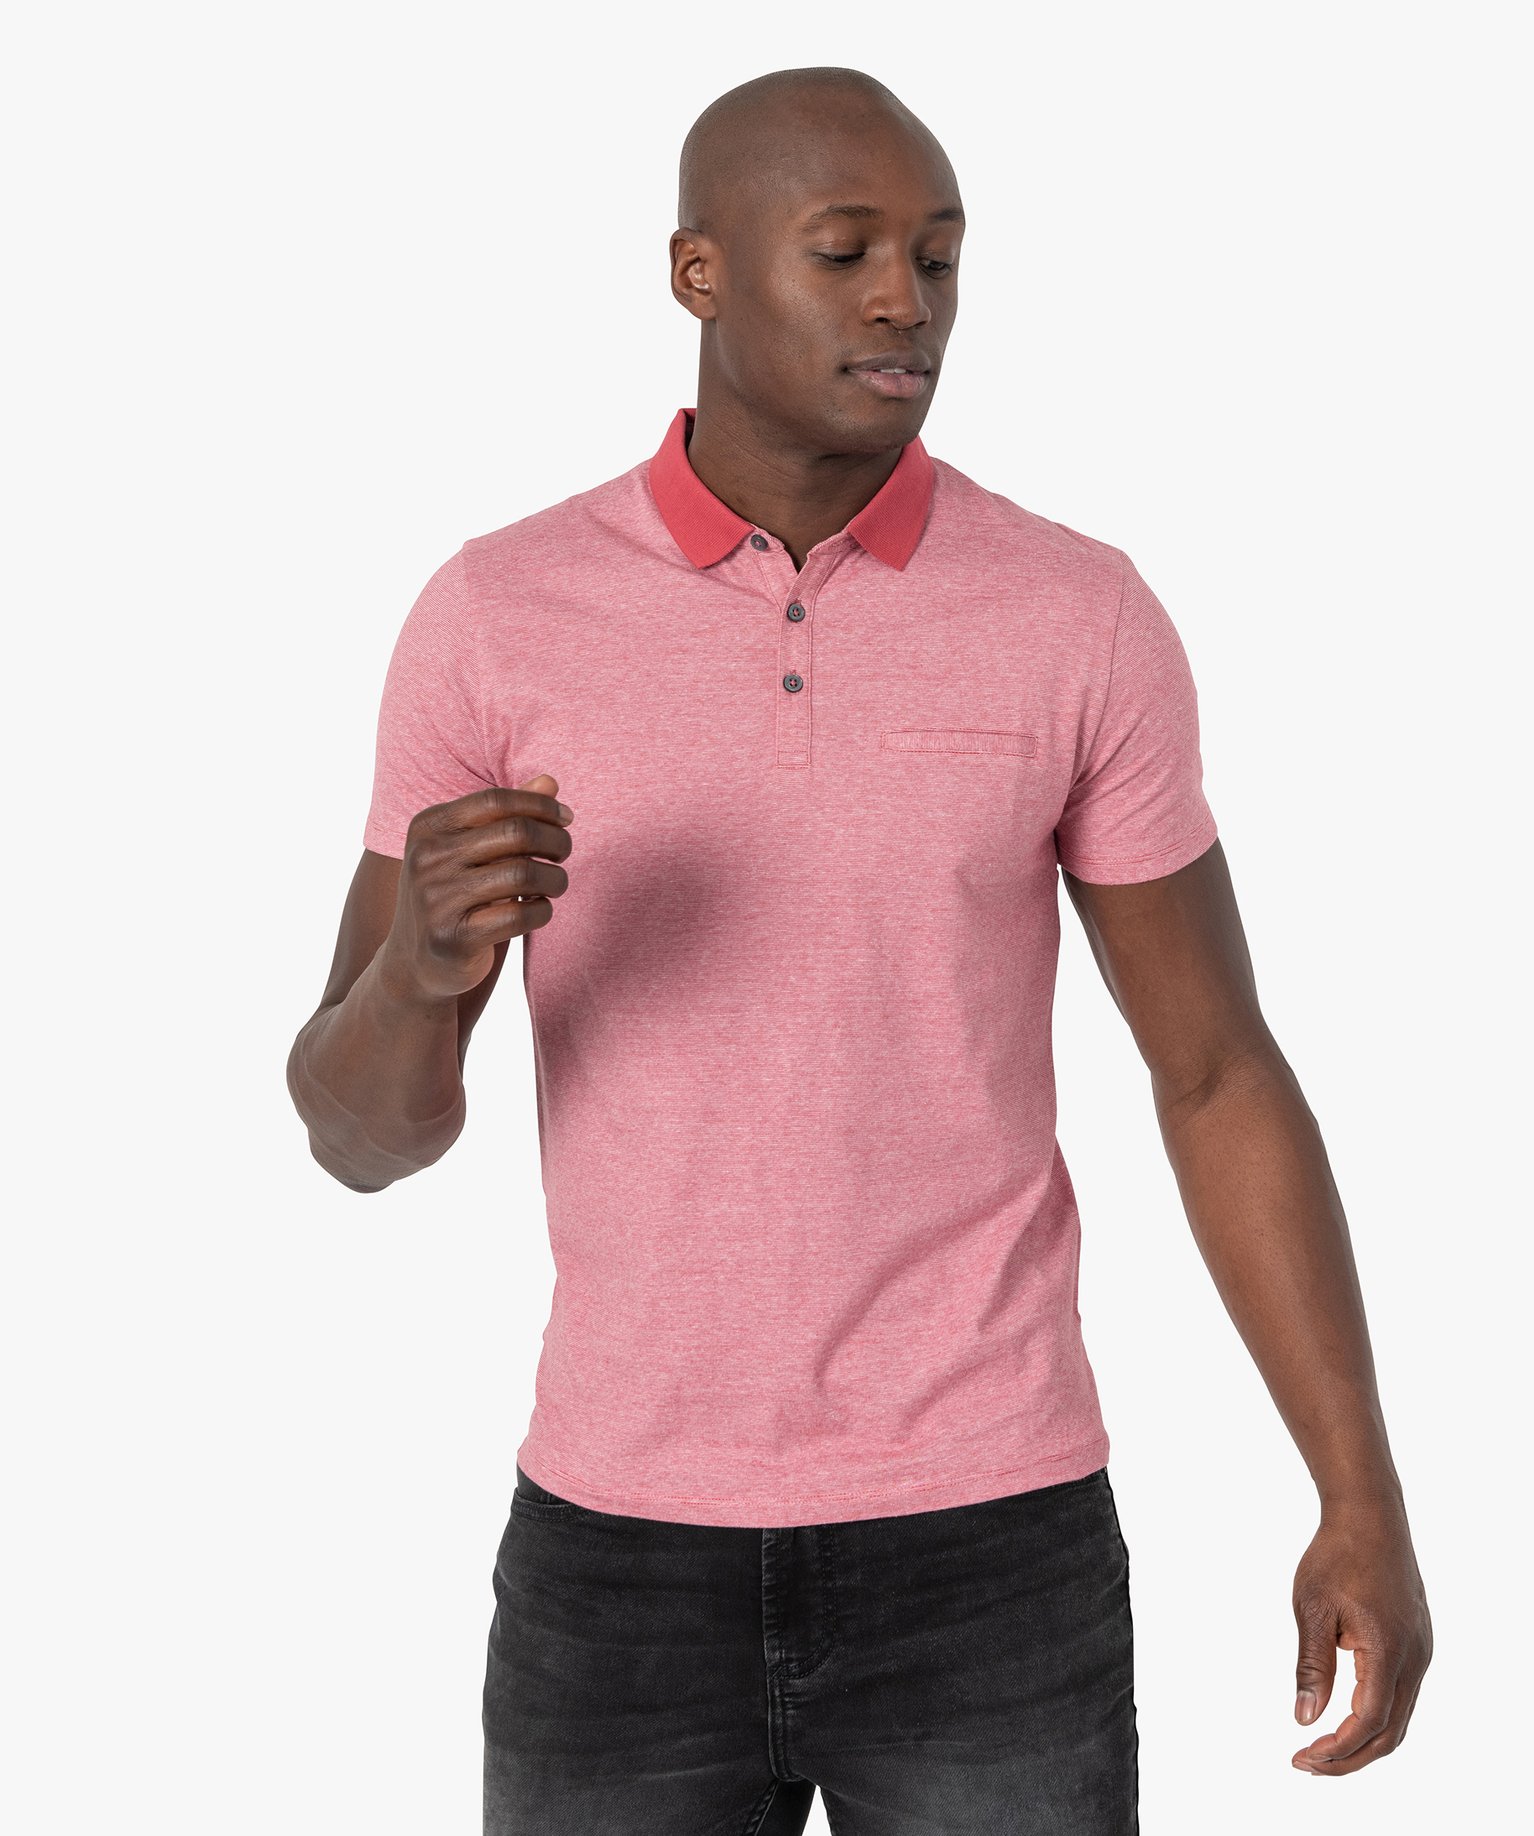 polo homme a fines rayures et manches courtes rose polos